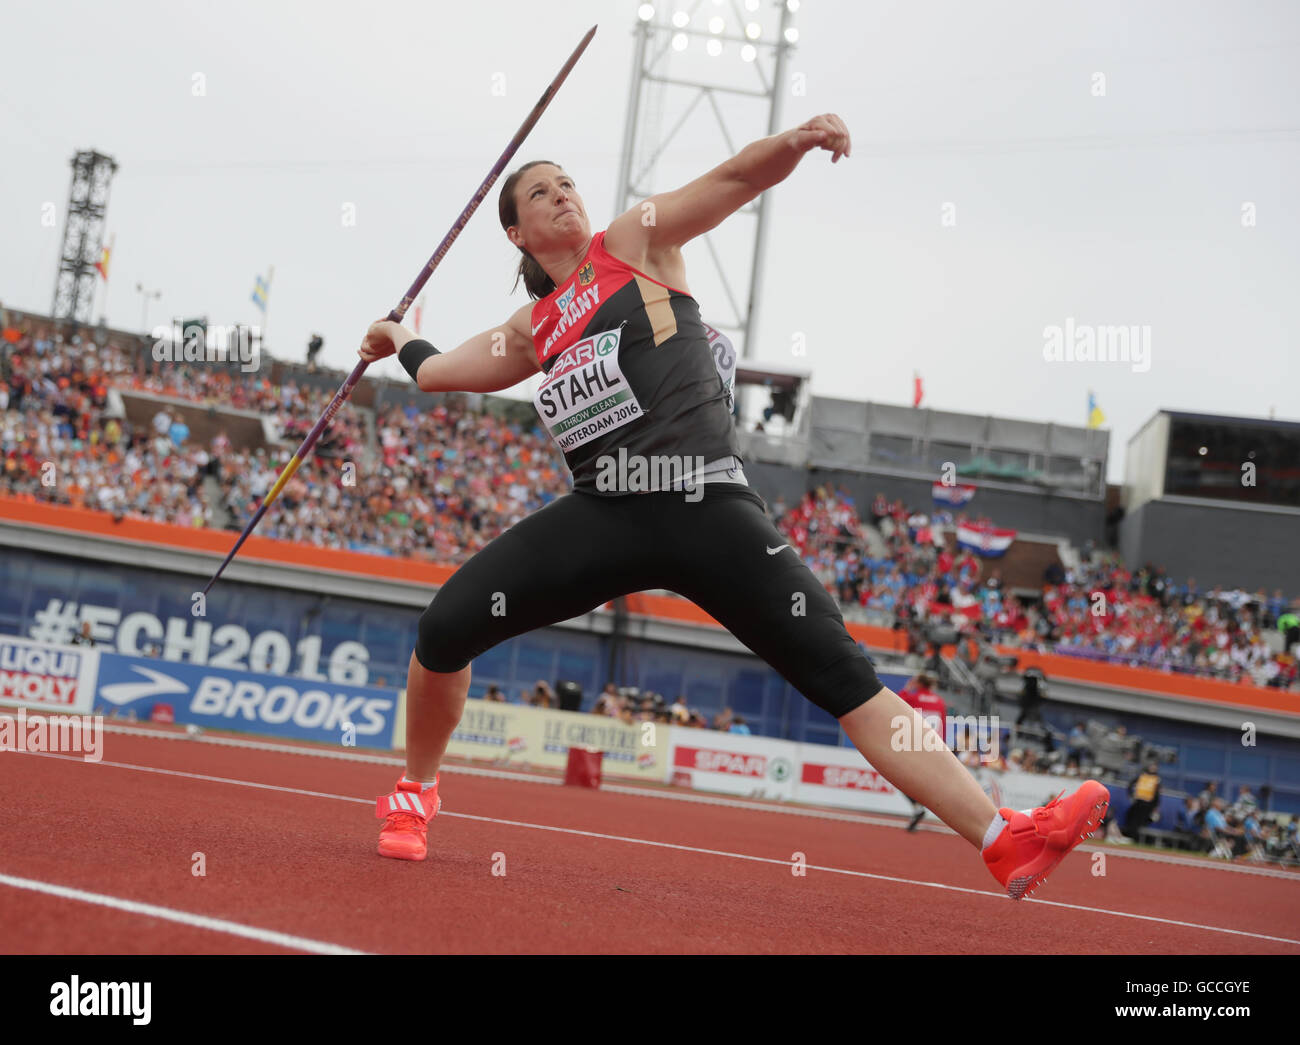 Amsterdam, The Netherlands. 09th July, 2016. Germany's Linda Stahl competes in the women's Javelin Throw final at the European Athletics Championships at the Olympic Stadium in Amsterdam, The Netherlands, 09 July 2016. Photo: Michael Kappeler/dpa/Alamy Live News Stock Photo